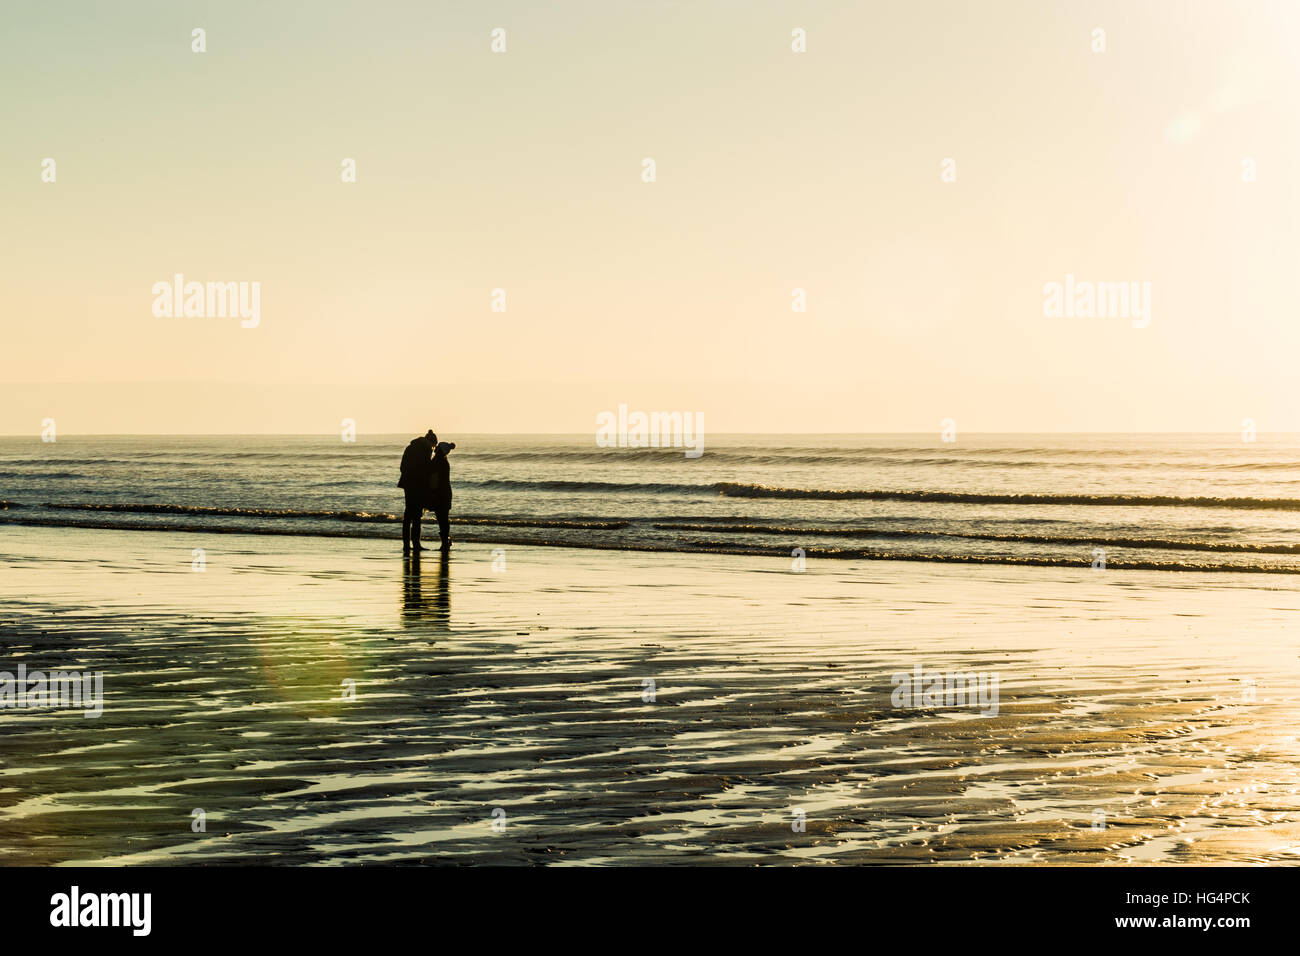 A young couple in love holding hands on a beach at sunset. Stock Photo